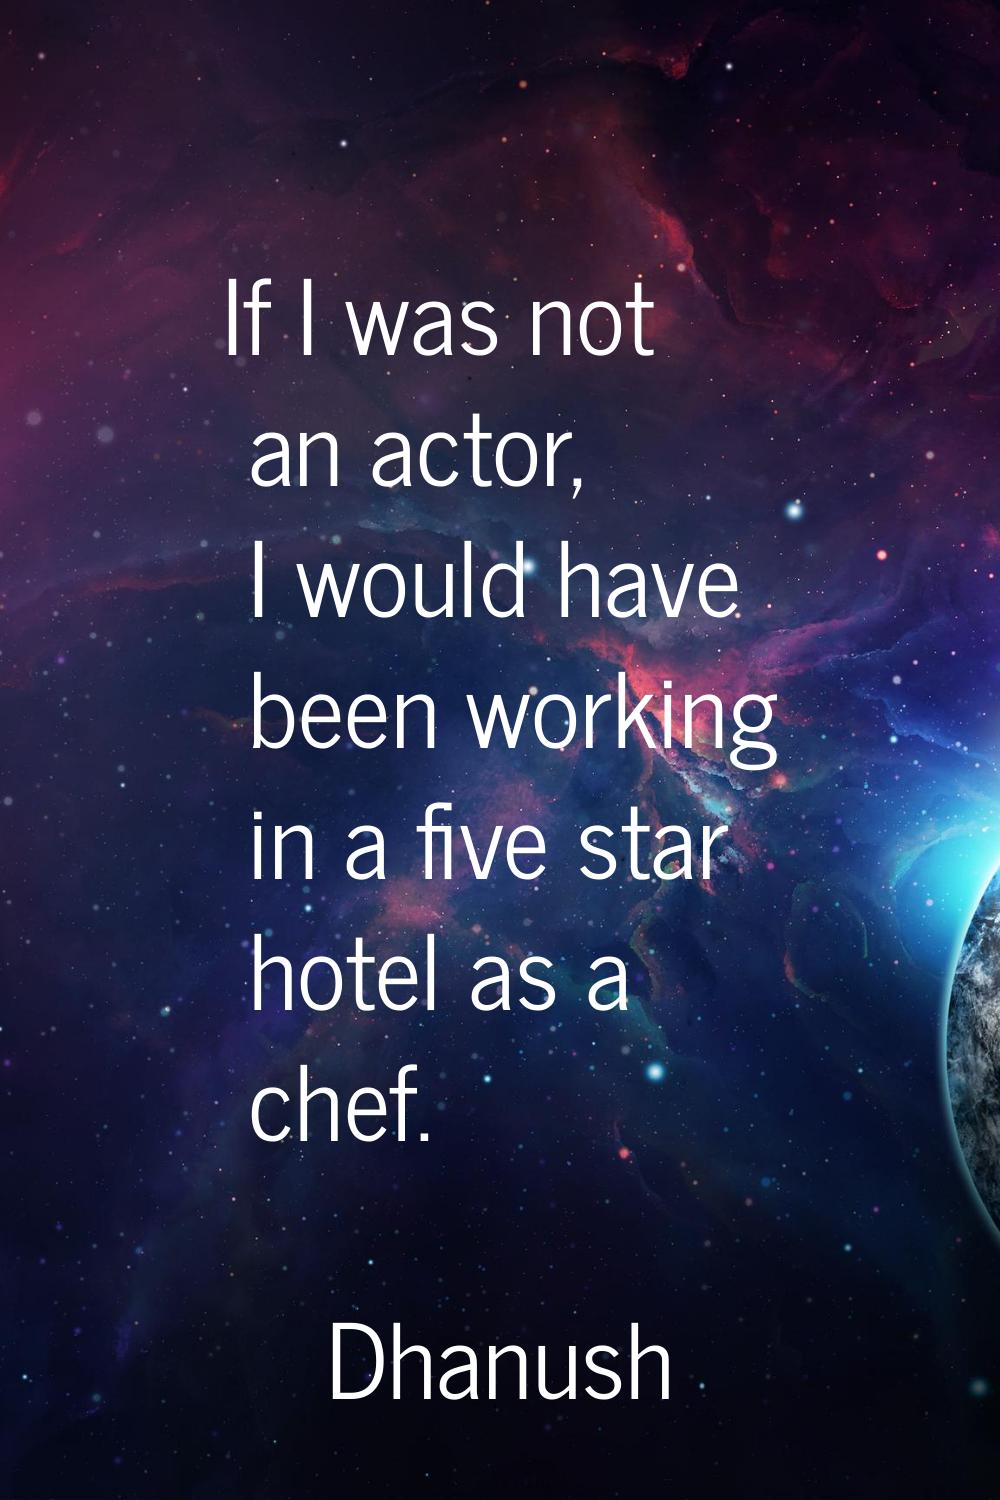 If I was not an actor, I would have been working in a five star hotel as a chef.